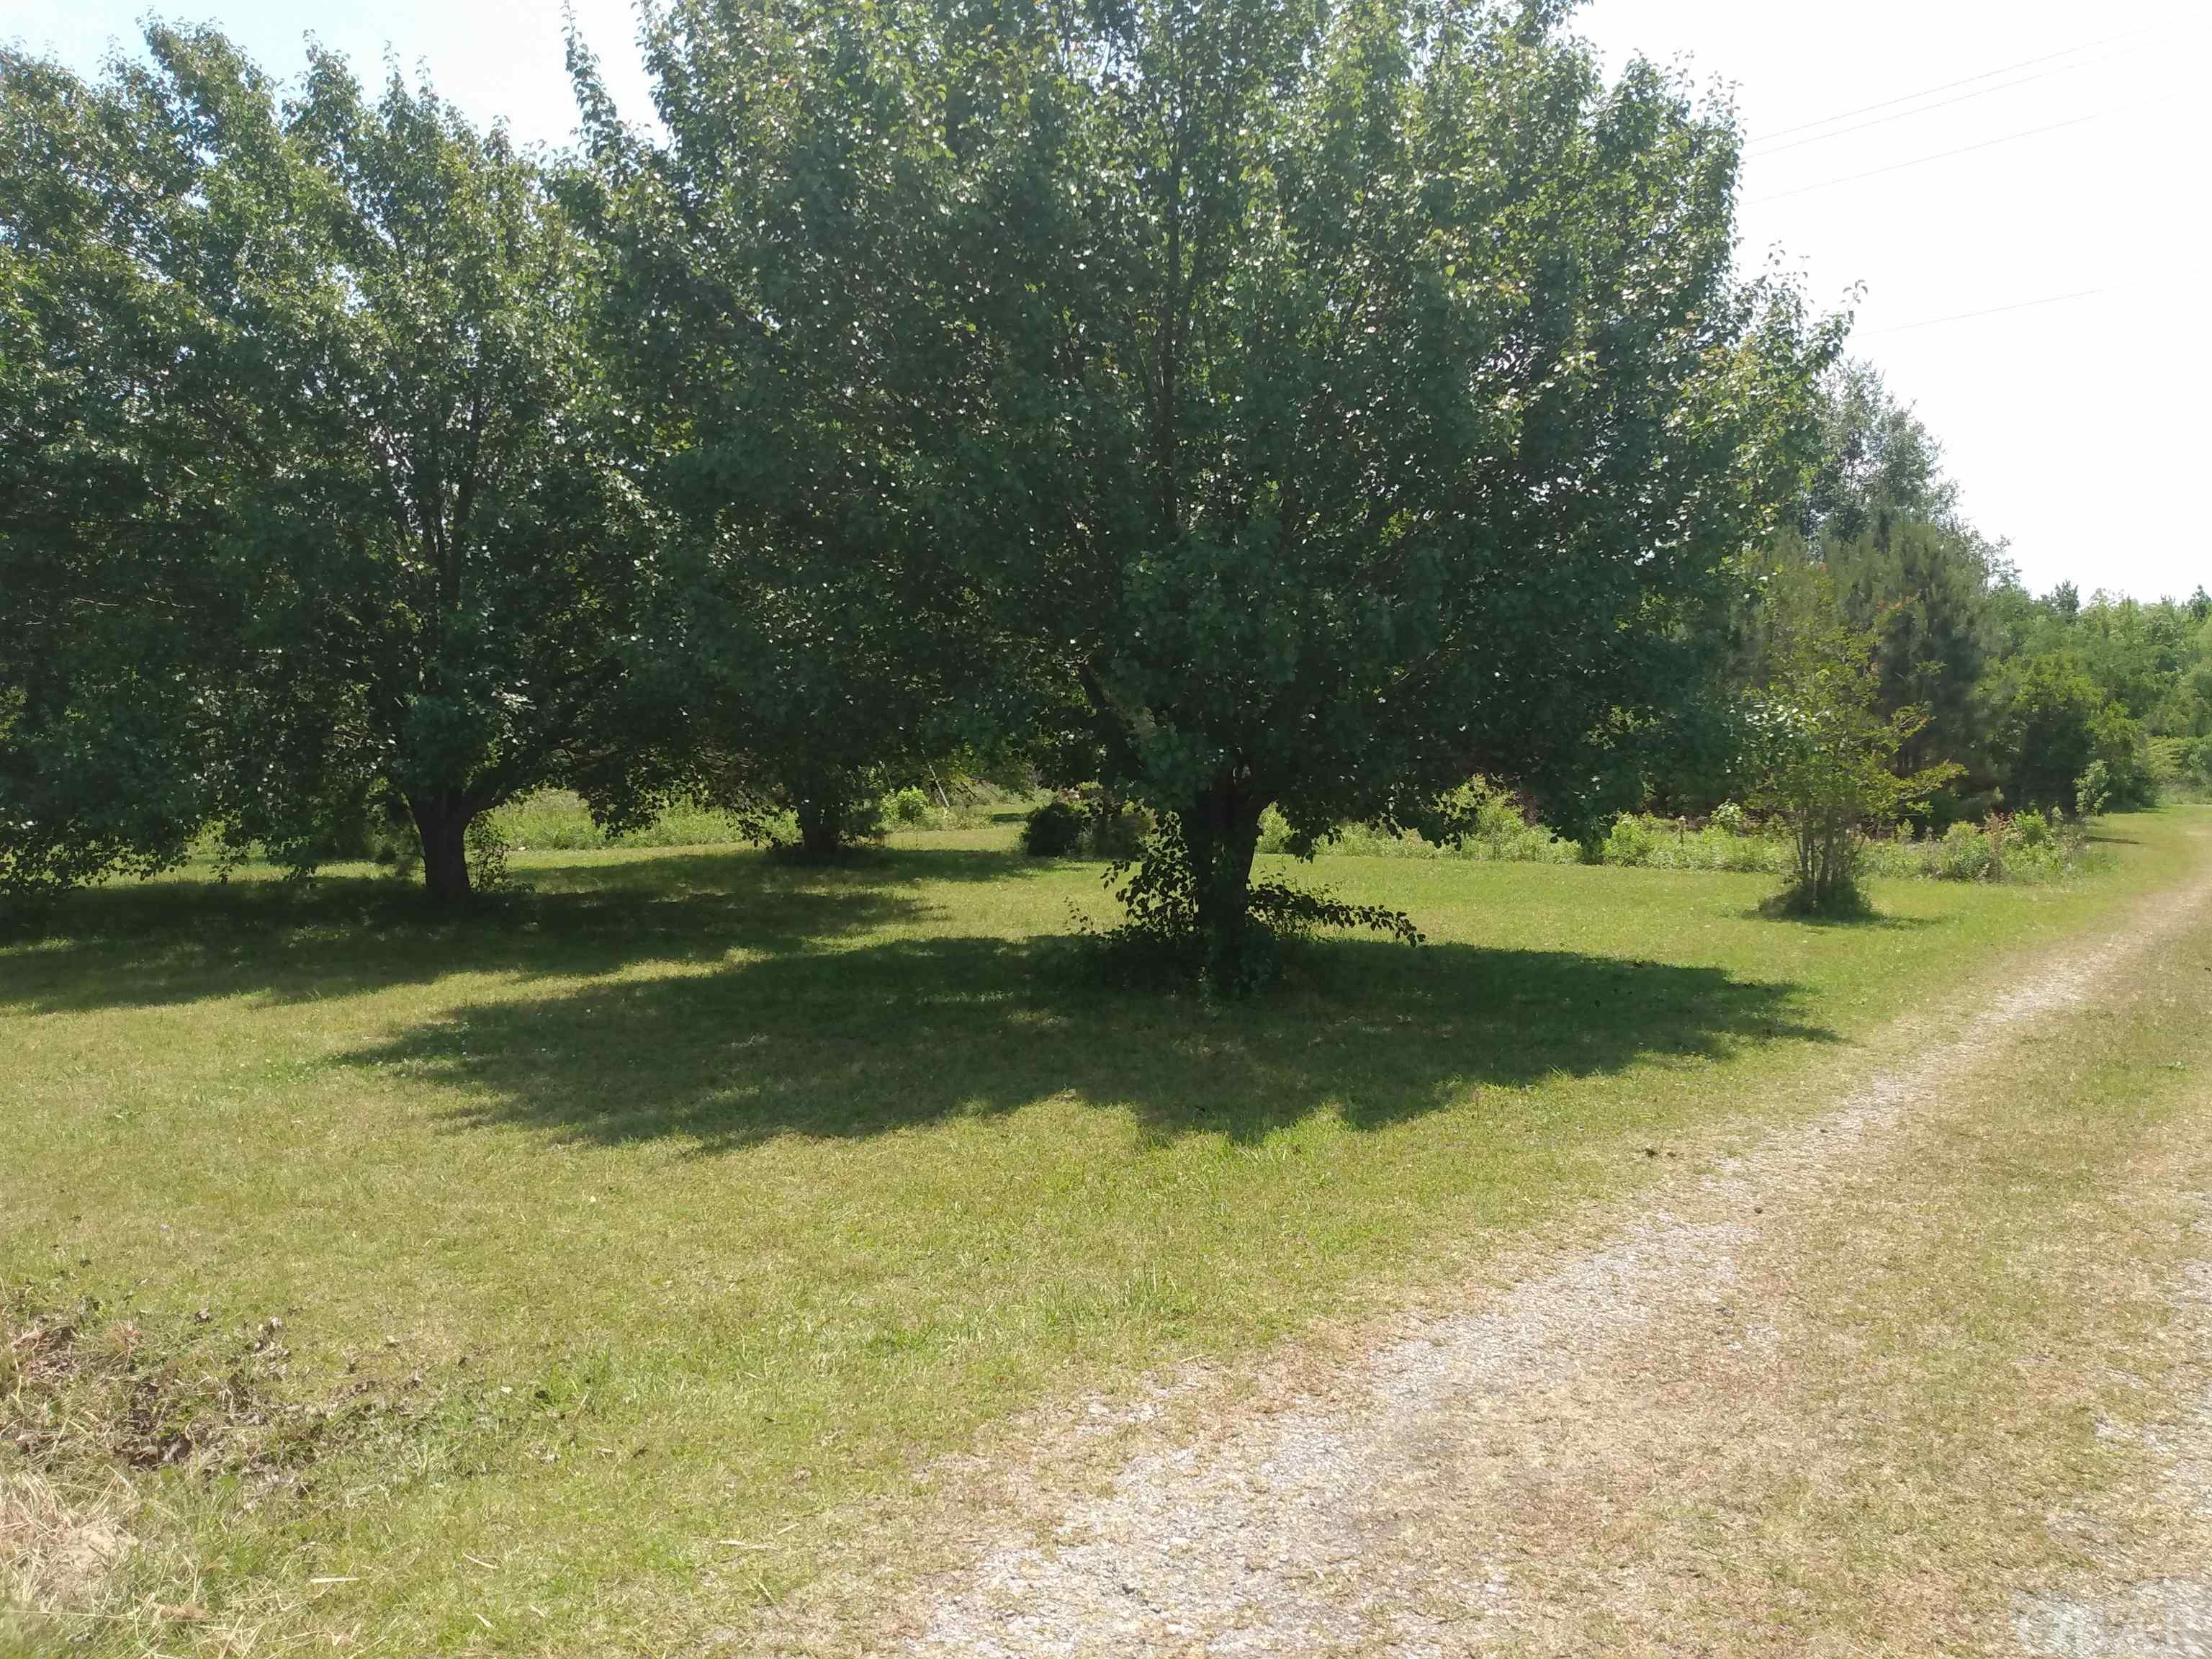 This spacious lot off of Highway 64 East, Columbia, NC offers 1.21 acres with municipal water, existing septic system and available electrical power. Lots of space for new home, garden, livestock  & more! It is located 1.5 miles east of Columbia on 64, a heavily traveled corridor to the NC OBX! High visibility location! Offered at $60,000.